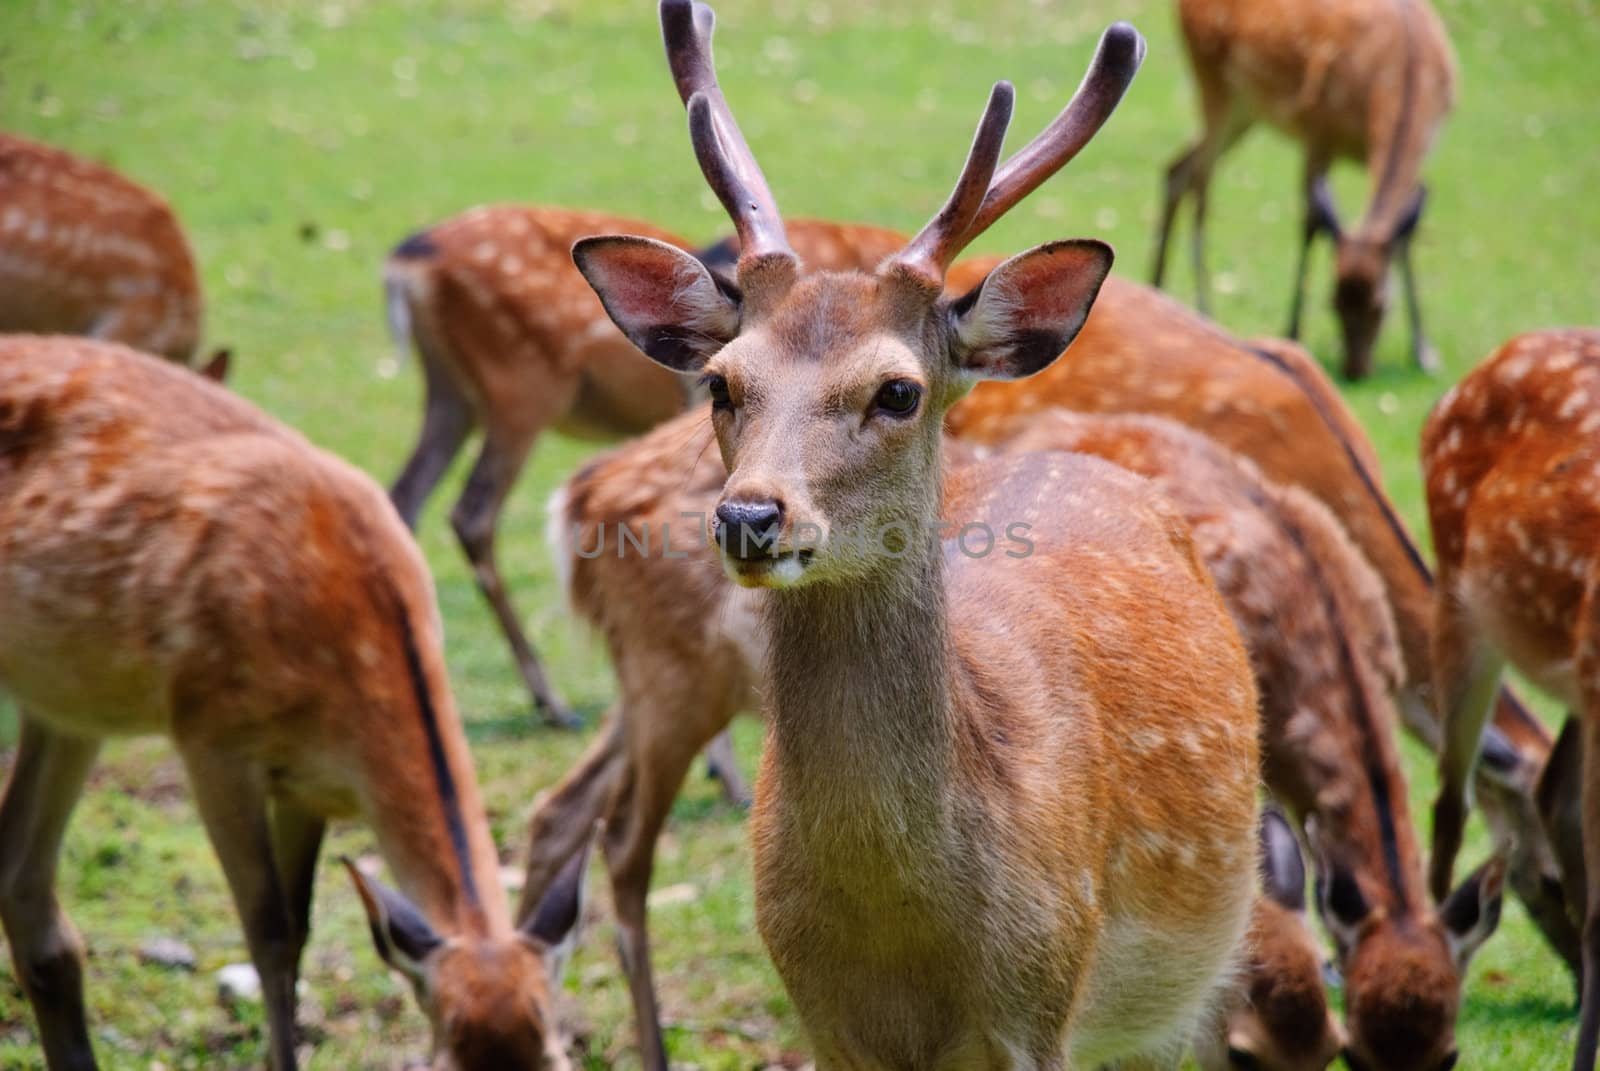 Male deer on the alert while the herd is grazing grass